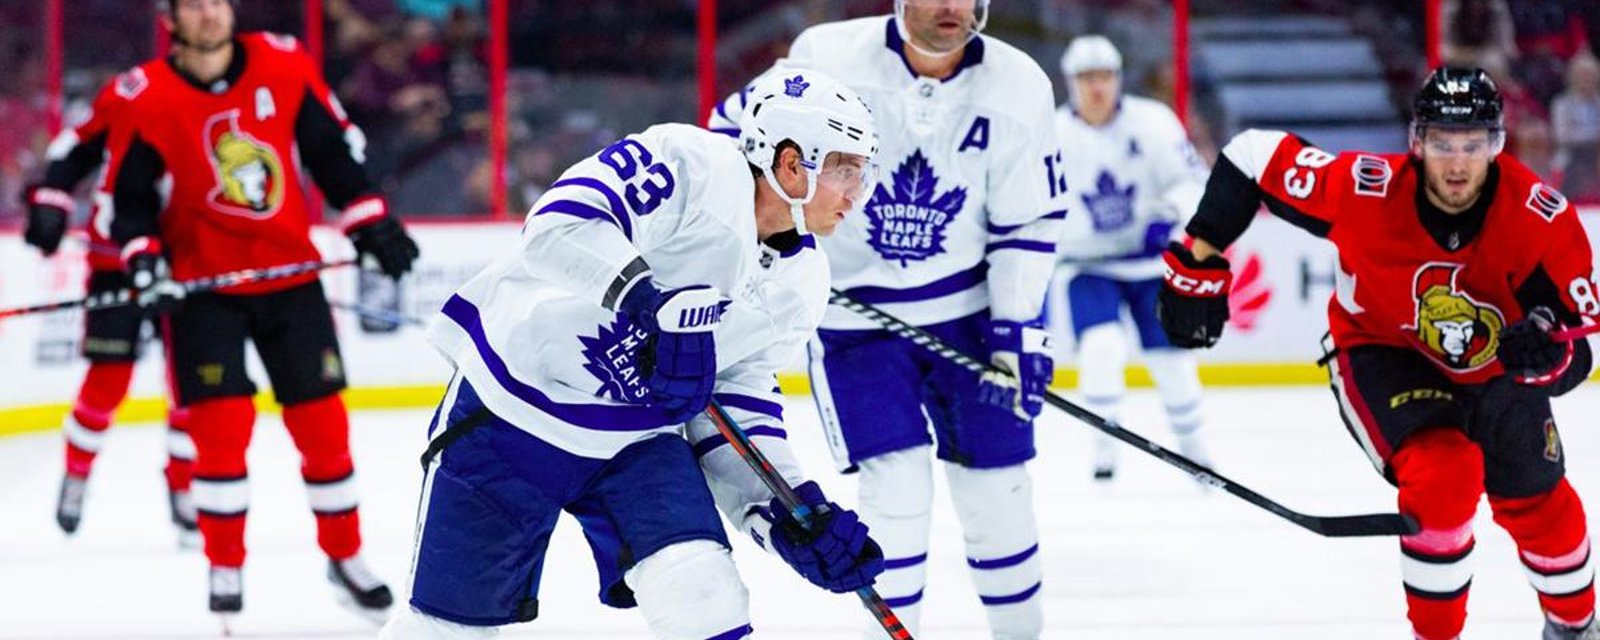 Report: Leafs rocked by more injuries